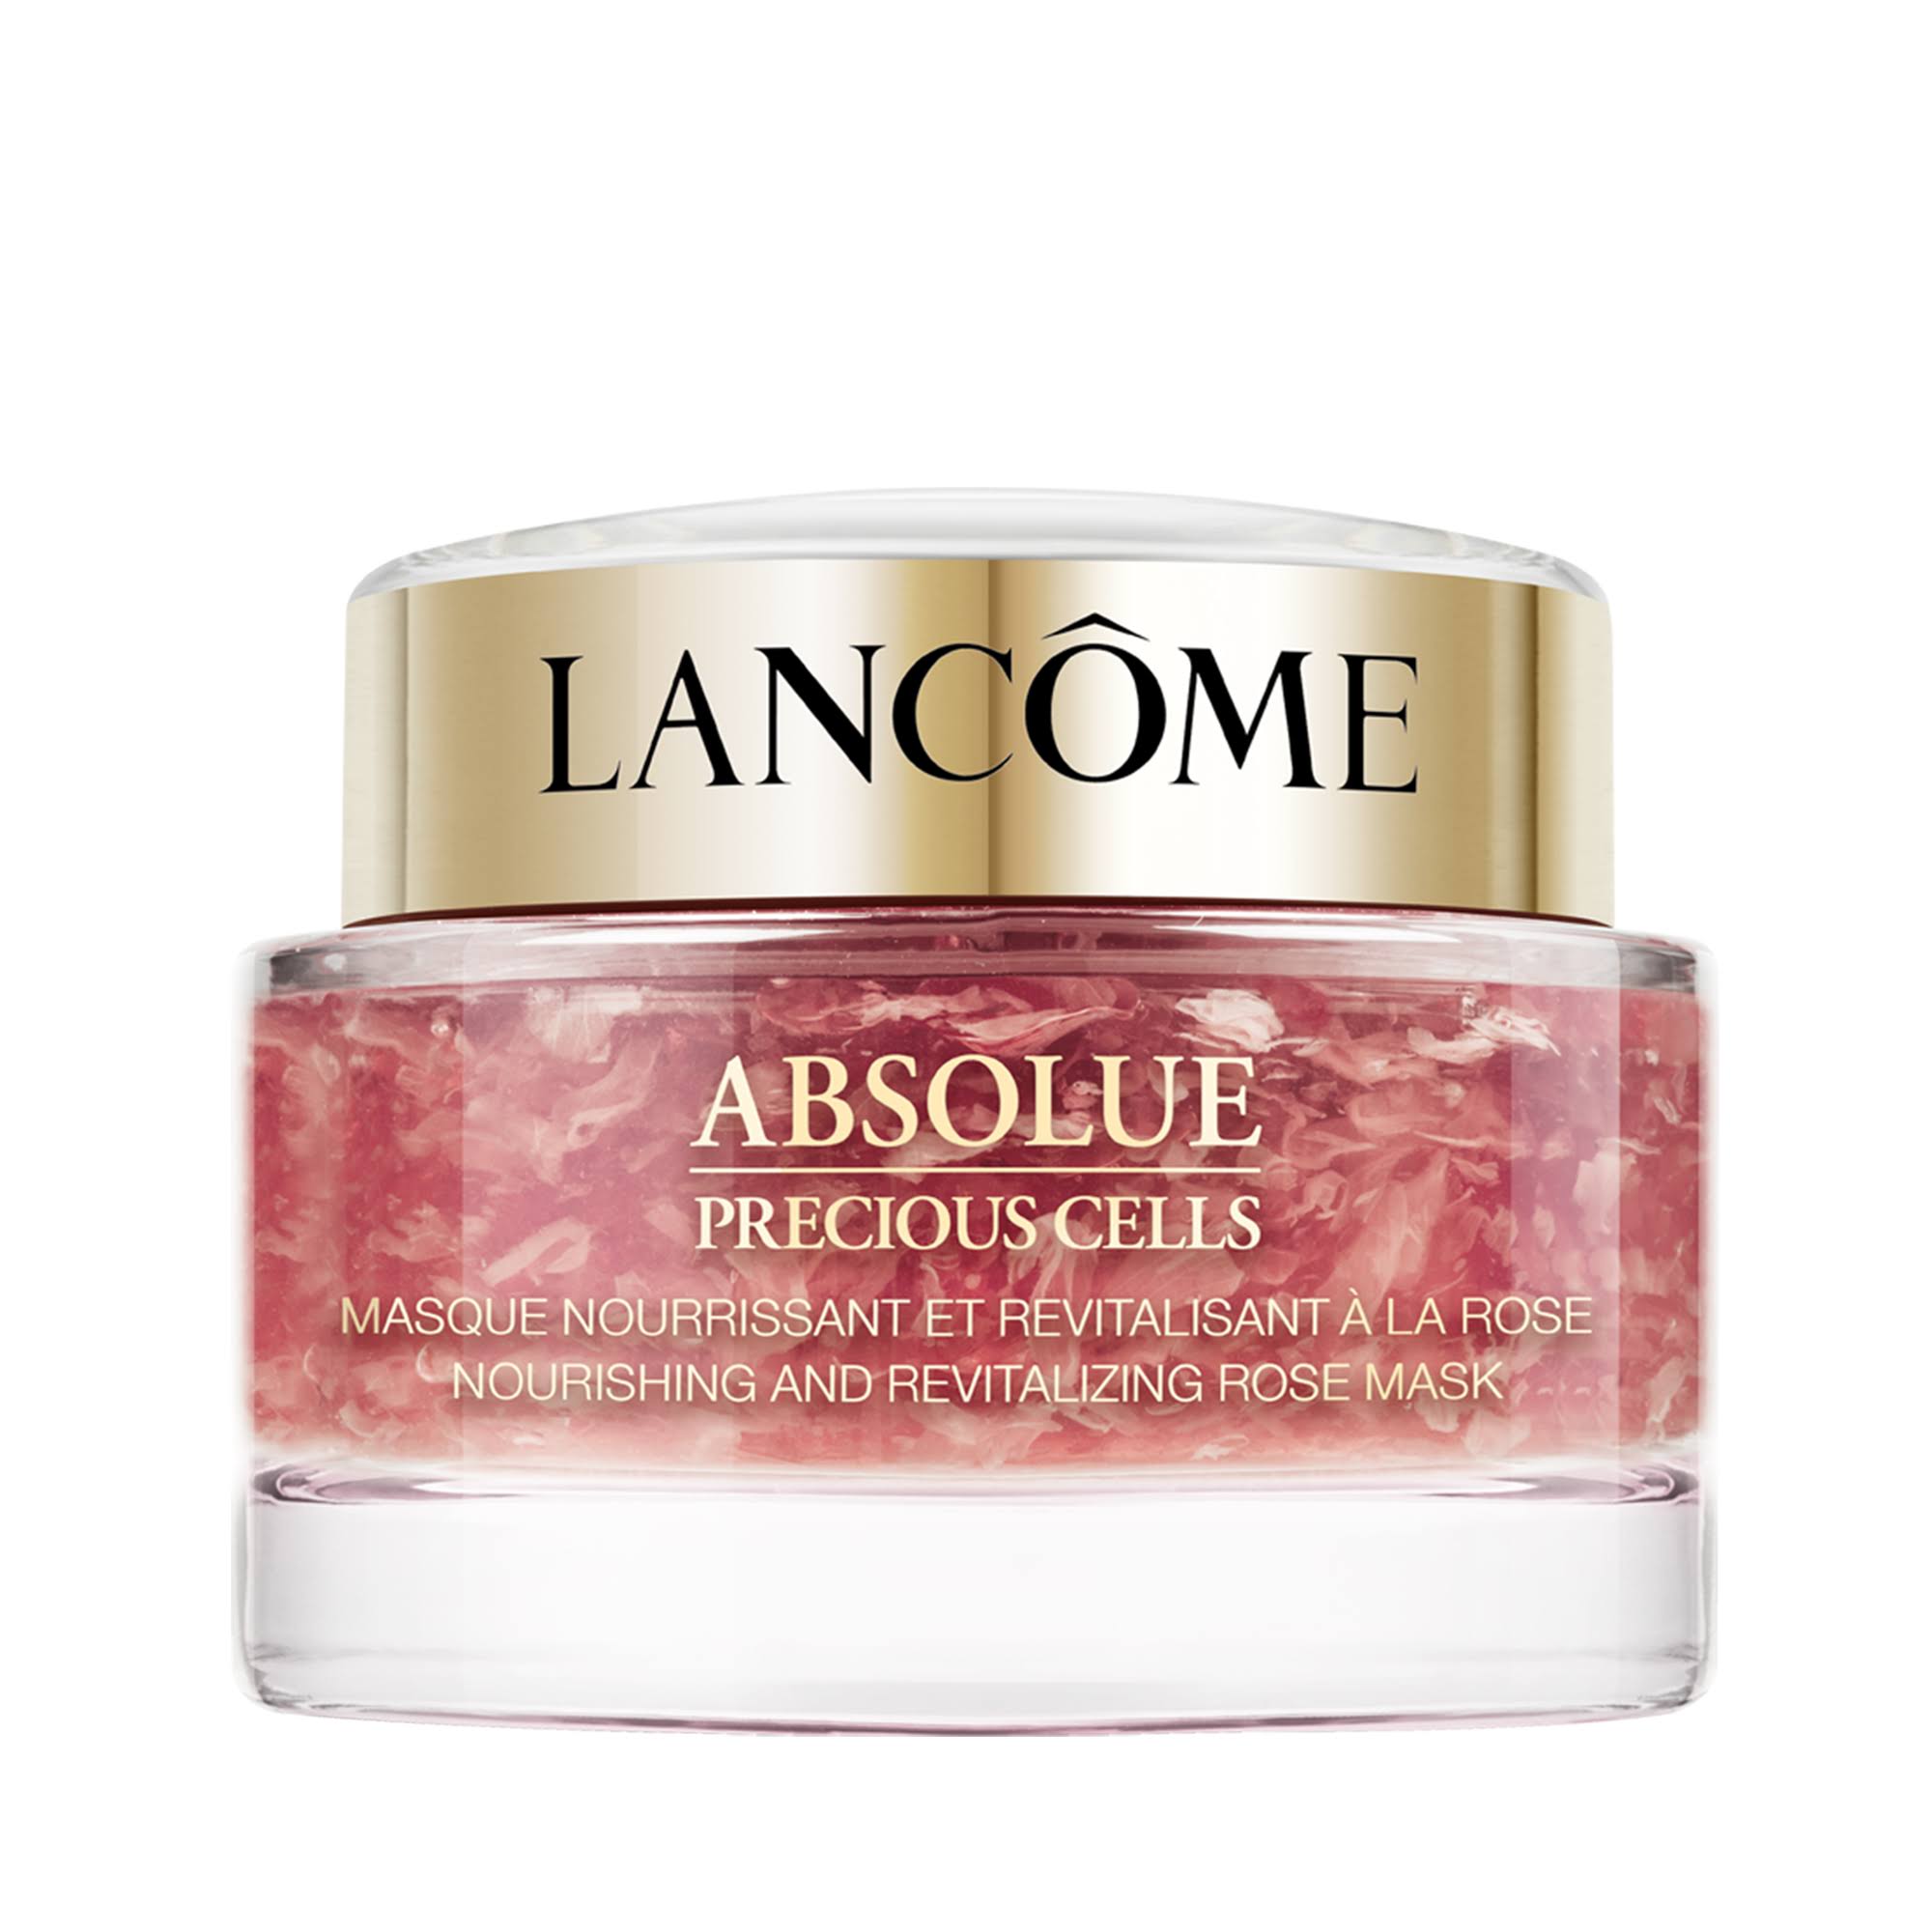 Lancome Absolue Precious Cells Rose Mask - 75 ml